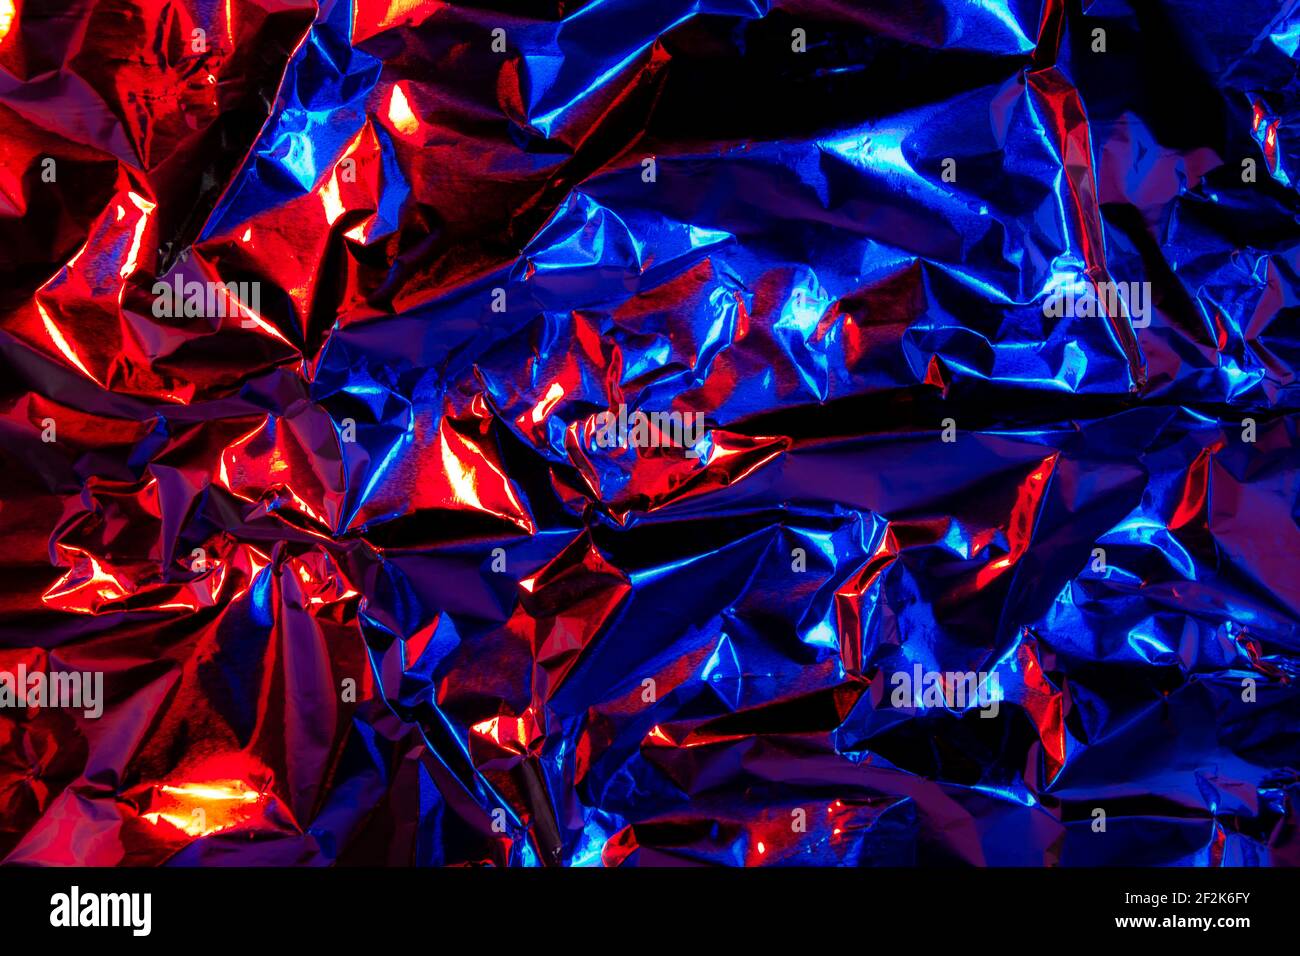 https://c8.alamy.com/comp/2F2K6FY/abstract-red-and-blue-aluminum-wrinkled-foil-background-texture-reflecting-red-and-blue-light-2F2K6FY.jpg